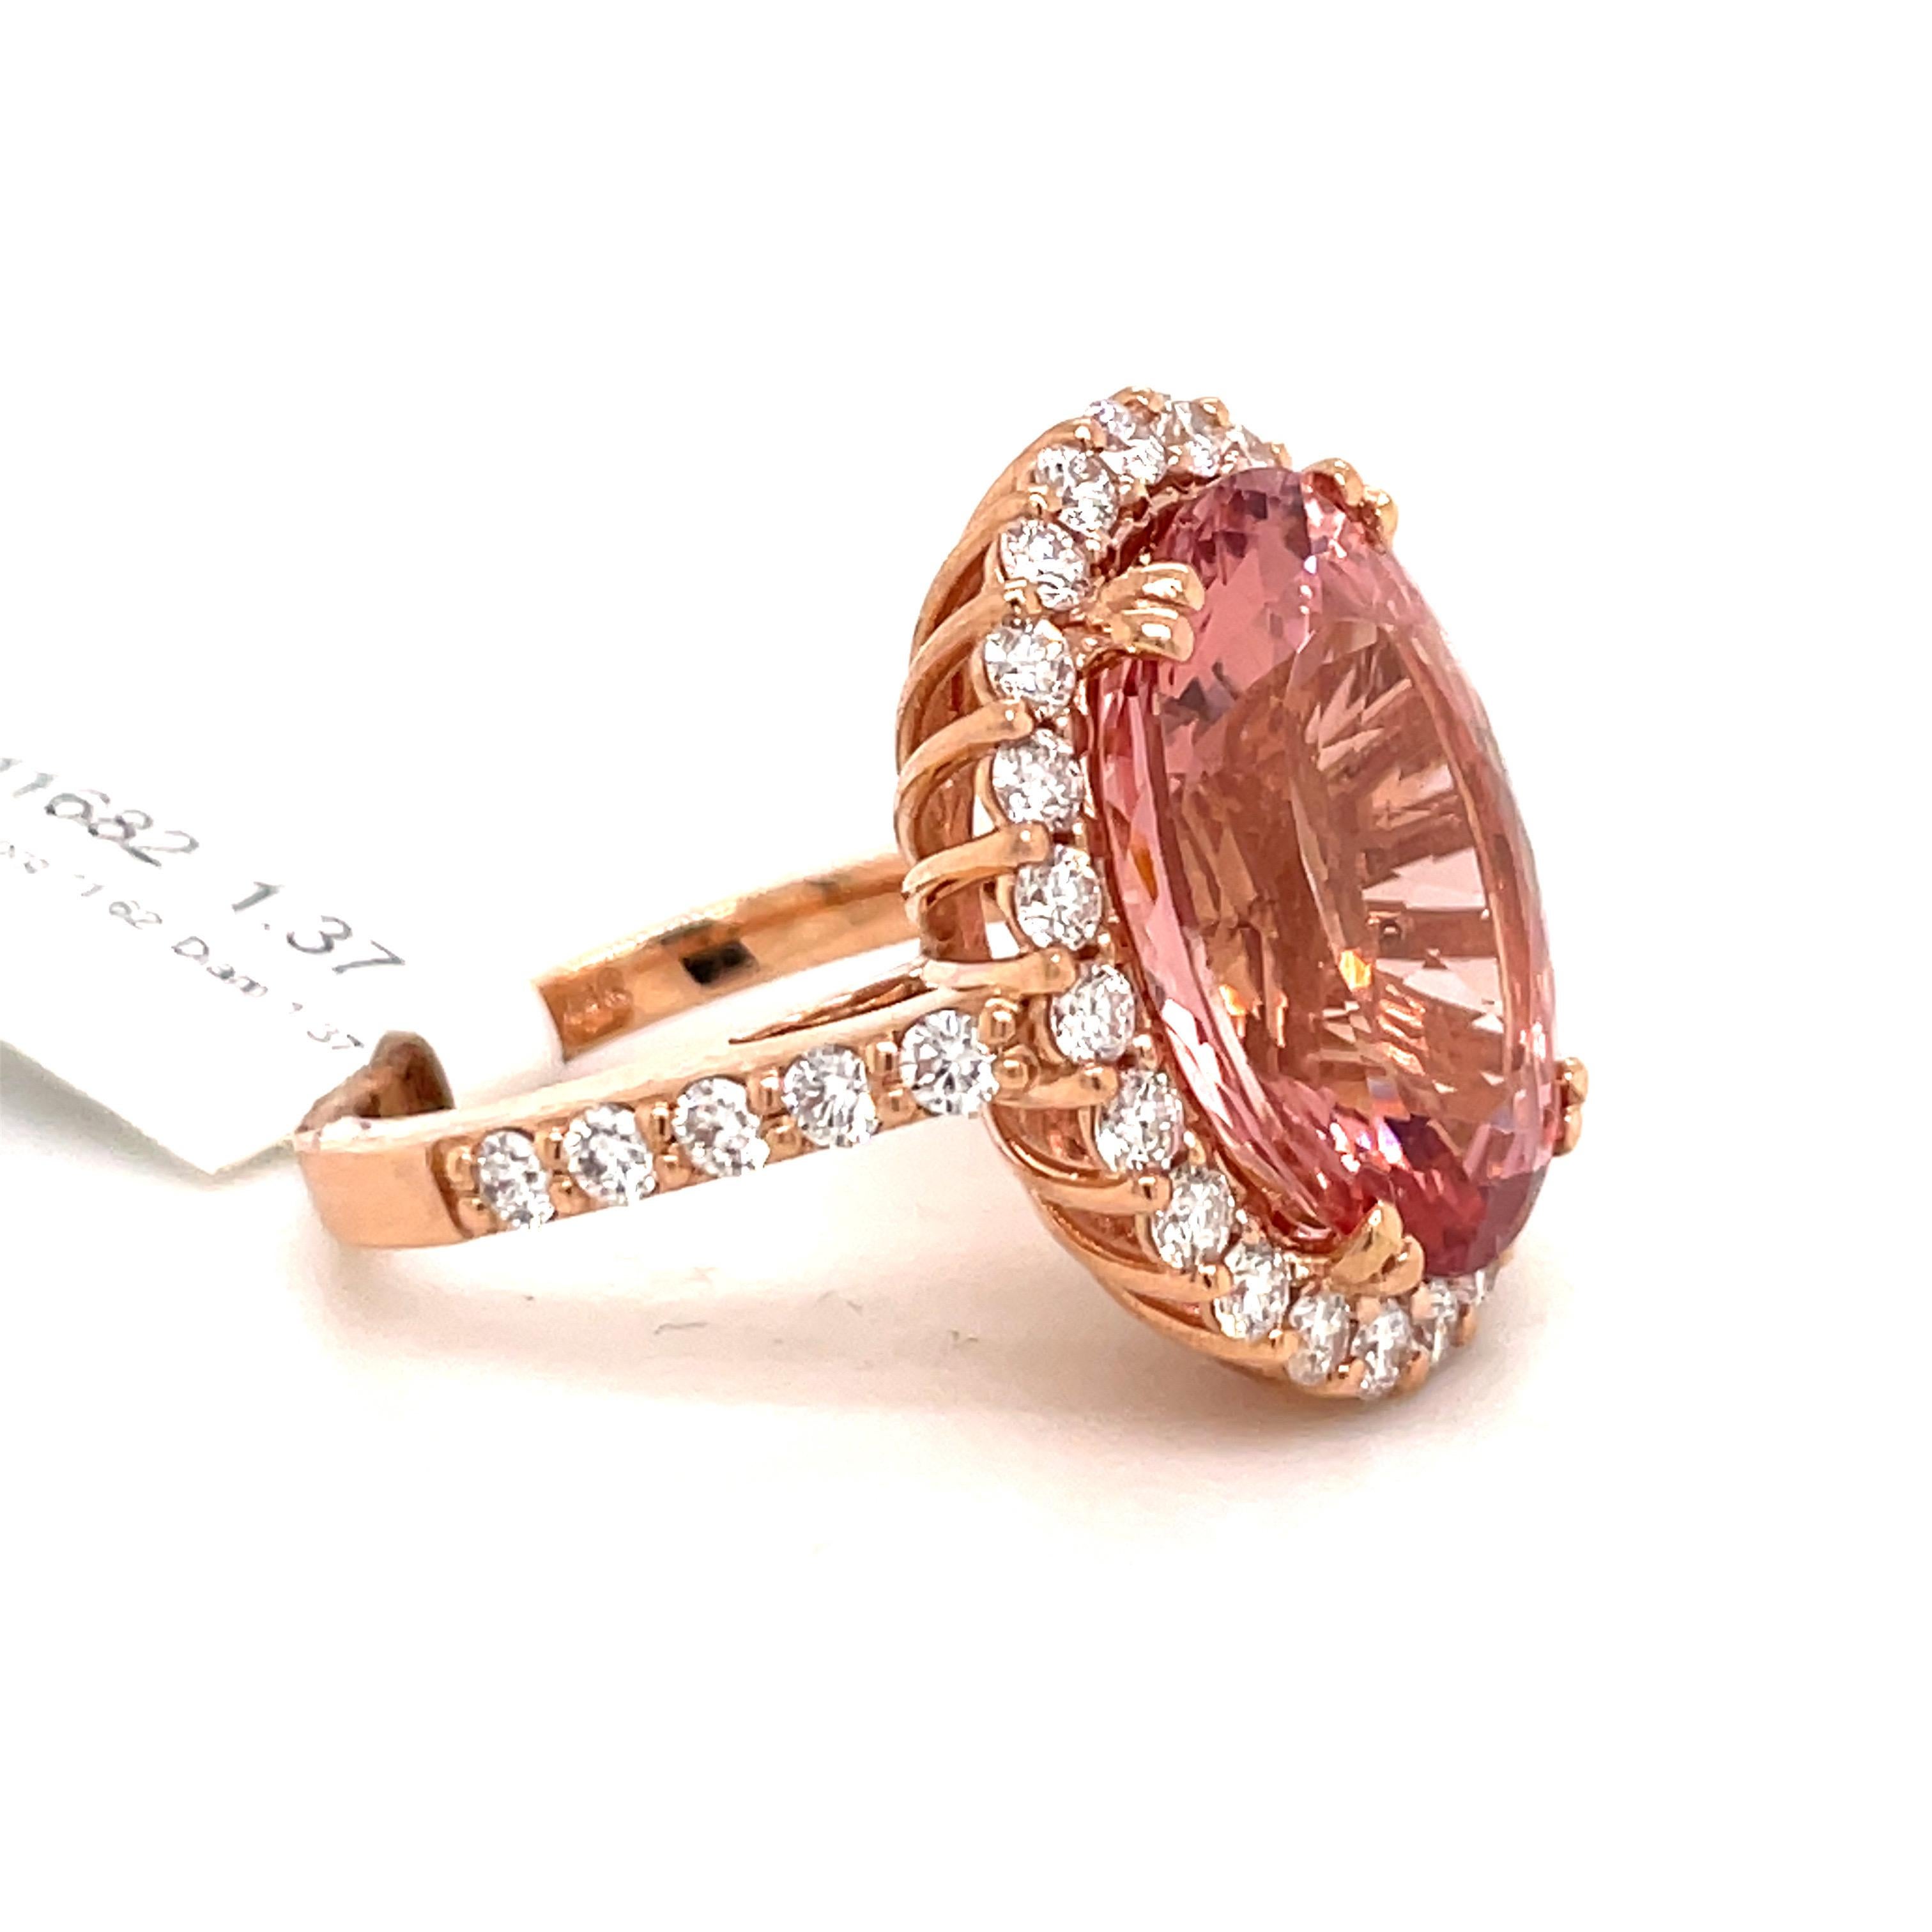 Oval Cut Morganite Diamond Halo Cocktail Ring 12.99 Carats 18 Karat Rose Gold In New Condition For Sale In New York, NY